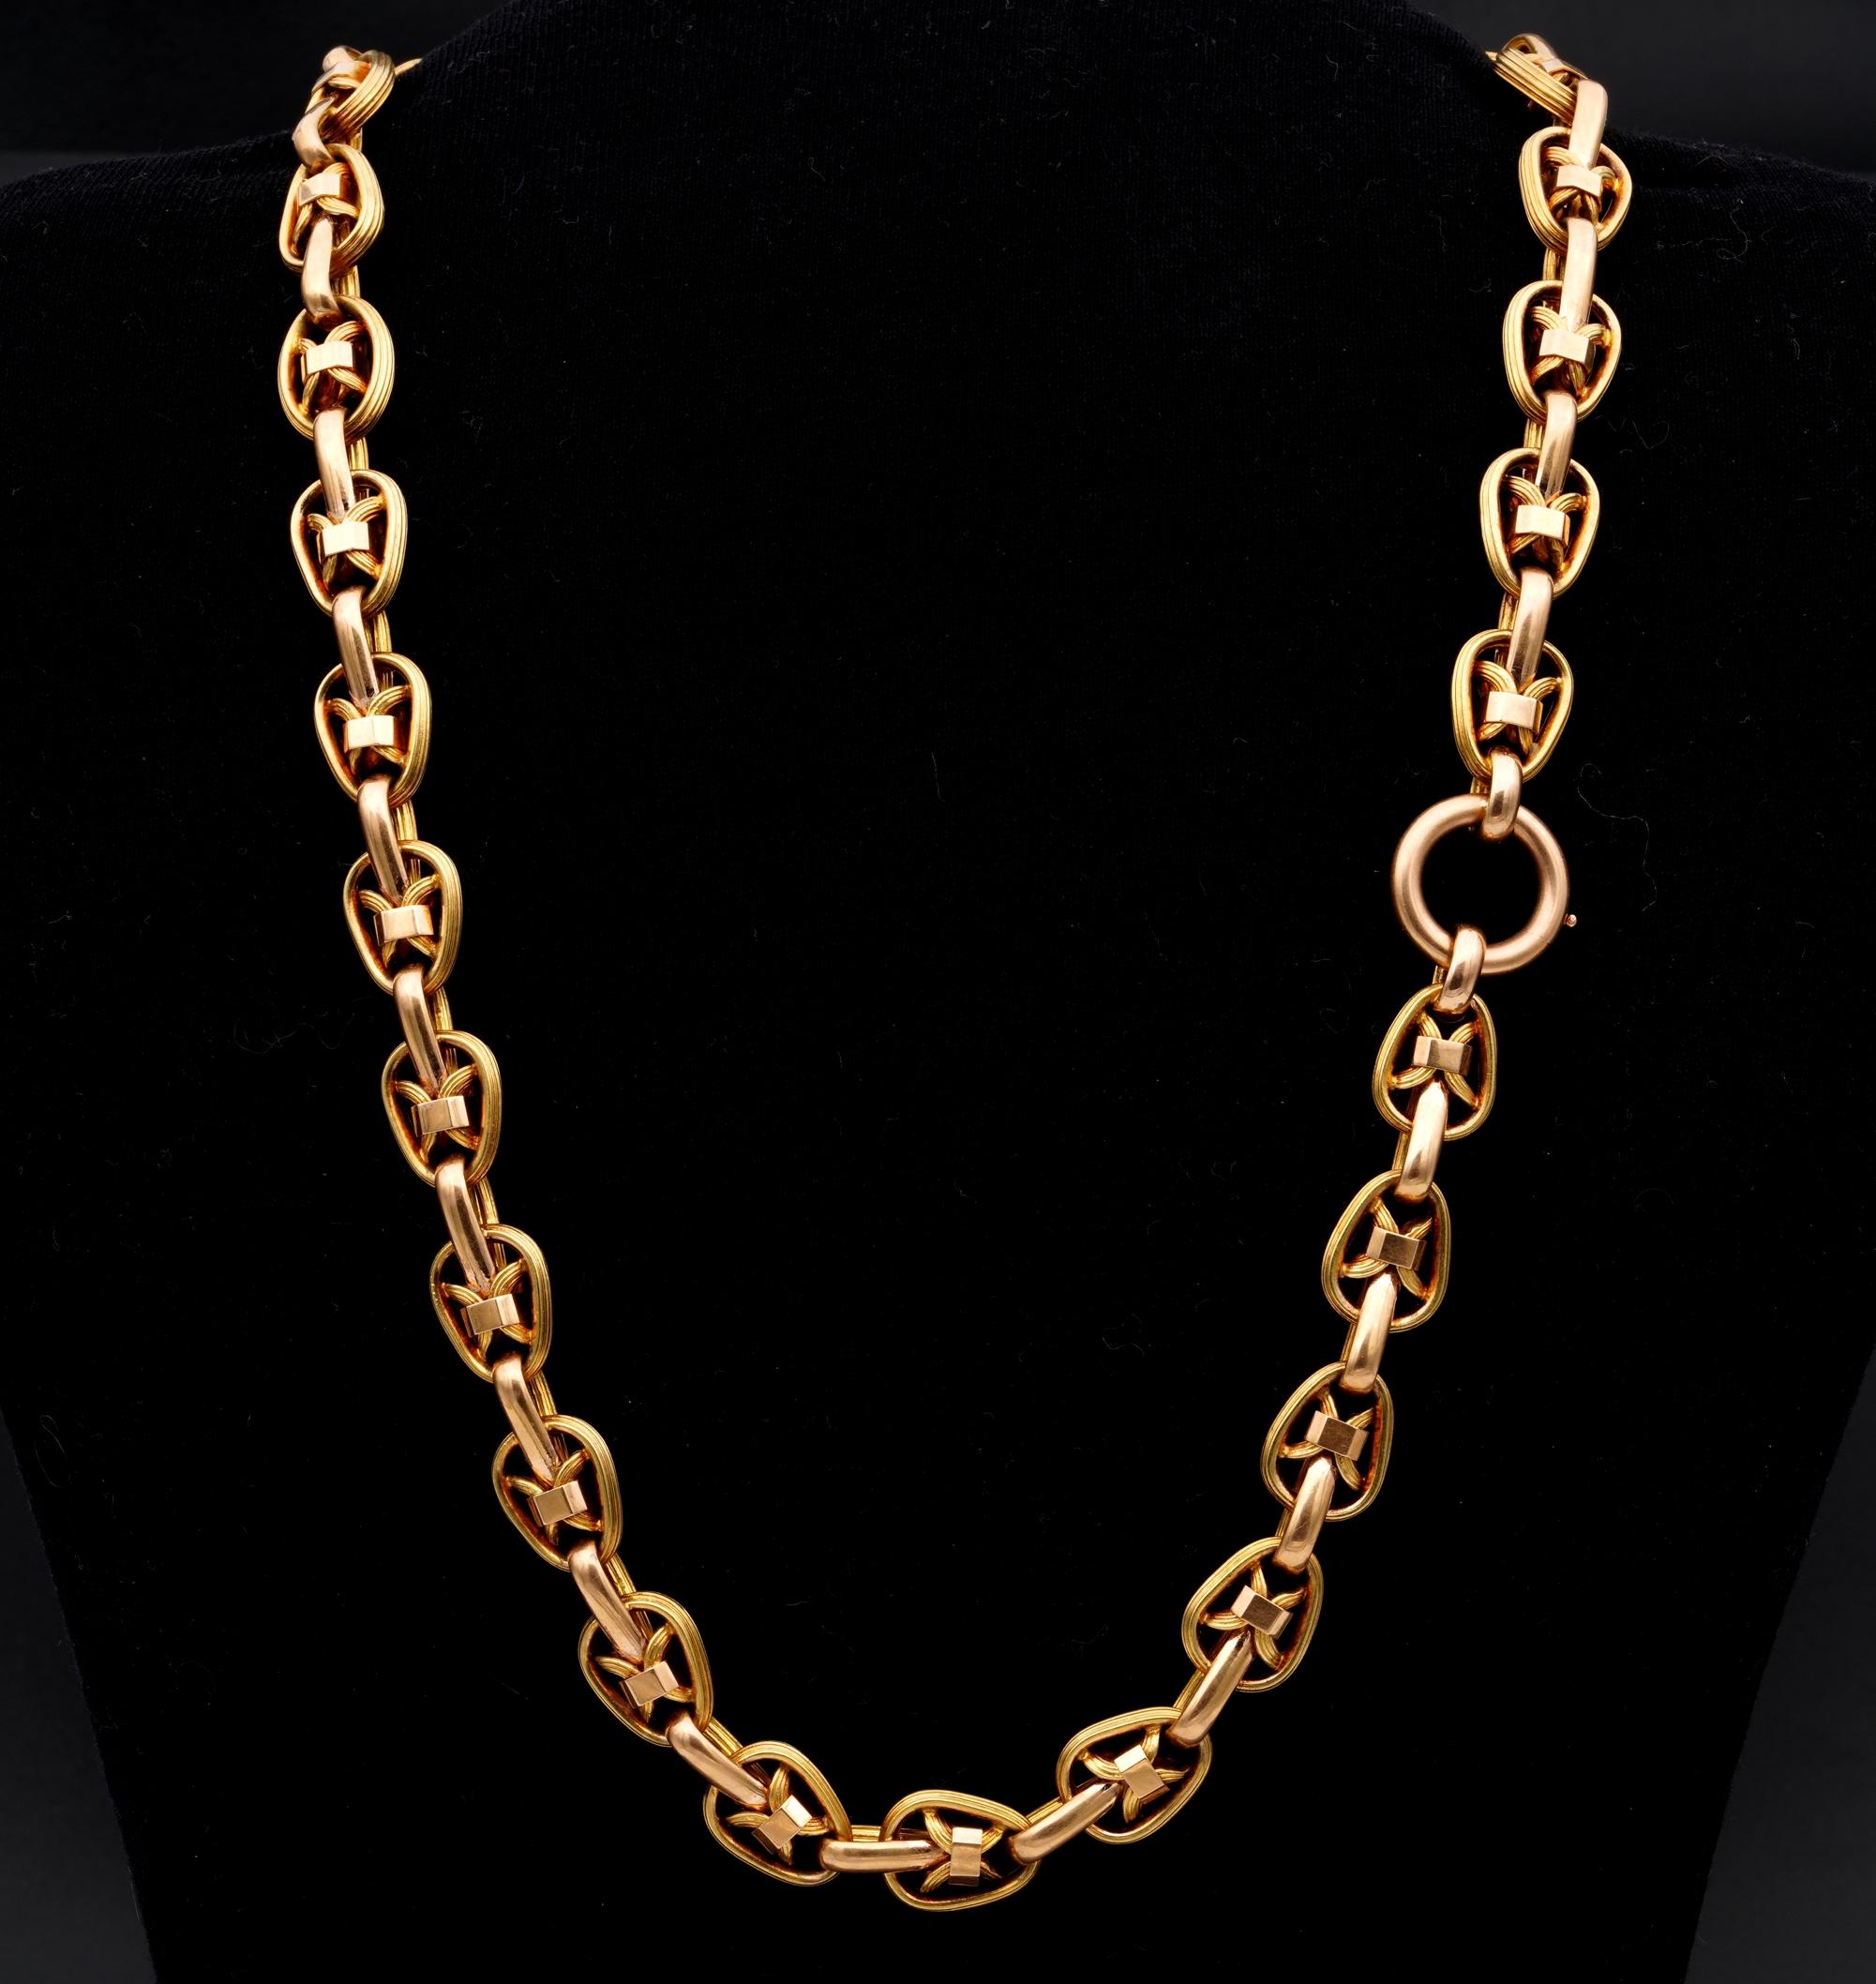 Rarest 18 KT solid gold links 

Originally made as watch chain turns into a stunning antique gold necklace
Rare articulated piped links with interlacing of remarkable work made during 1860 circa as beautiful as hardly seen
Made of solid 18 KT gold